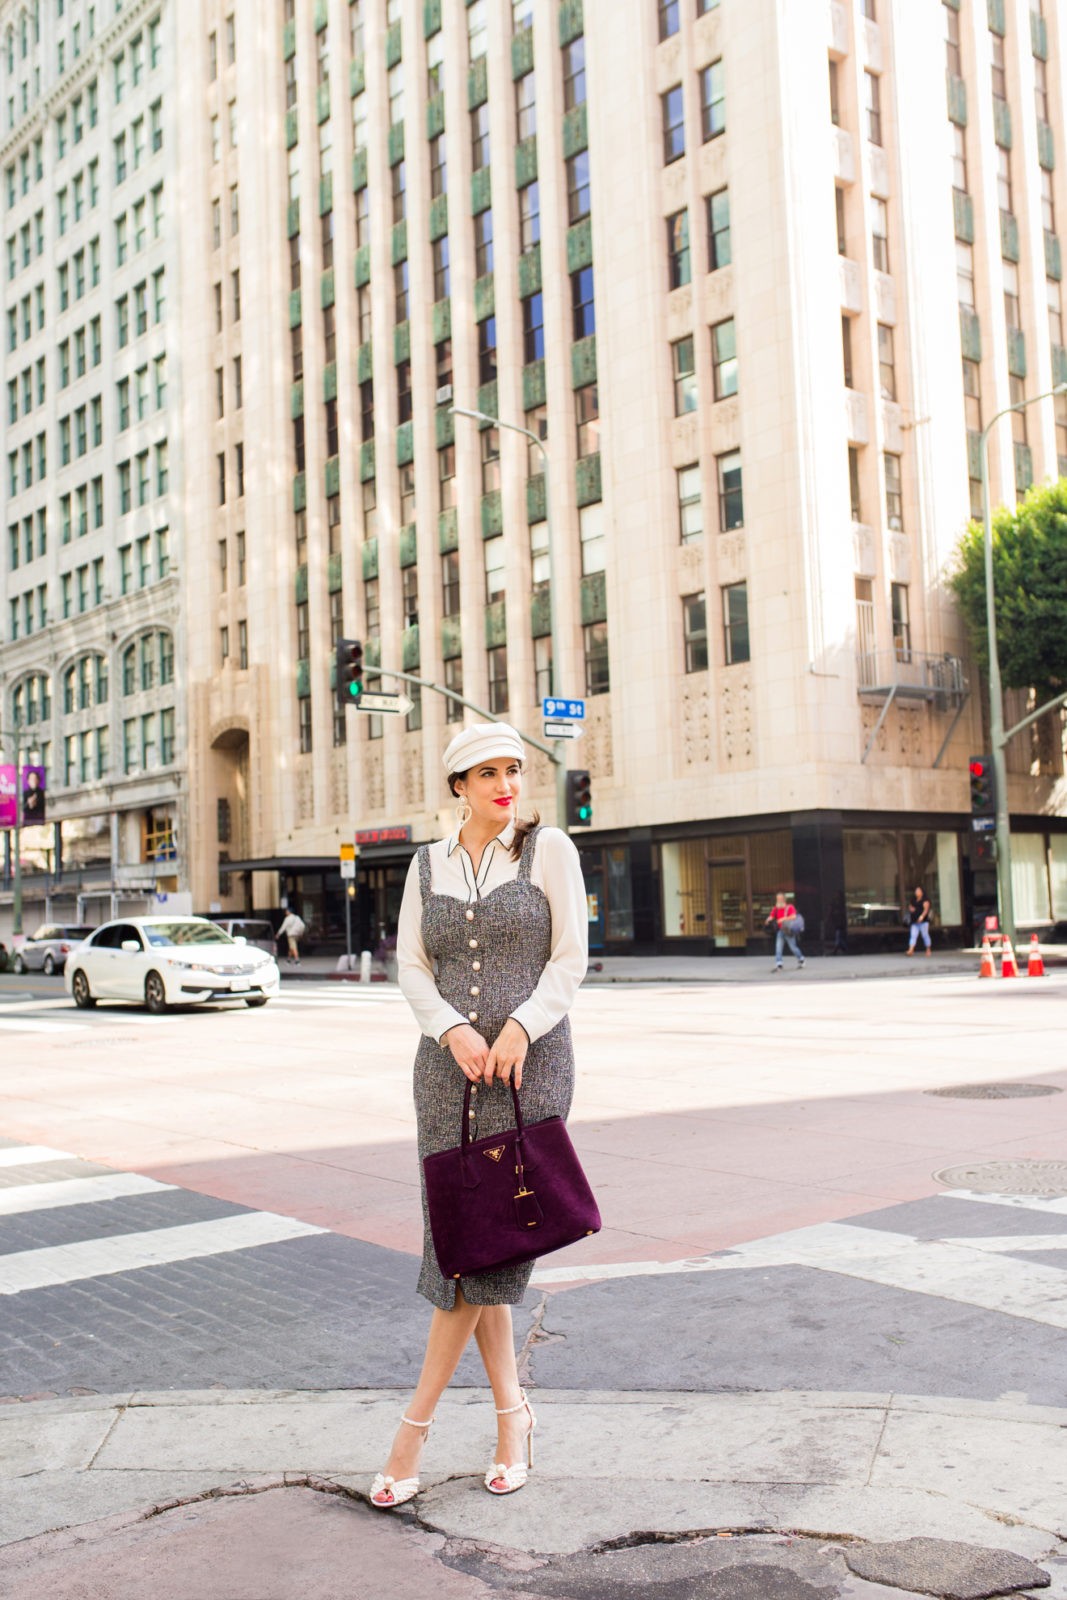 A Shopaholics Guide to Not Shopping by Los Angeles Fashion Blogger Laura Lily,